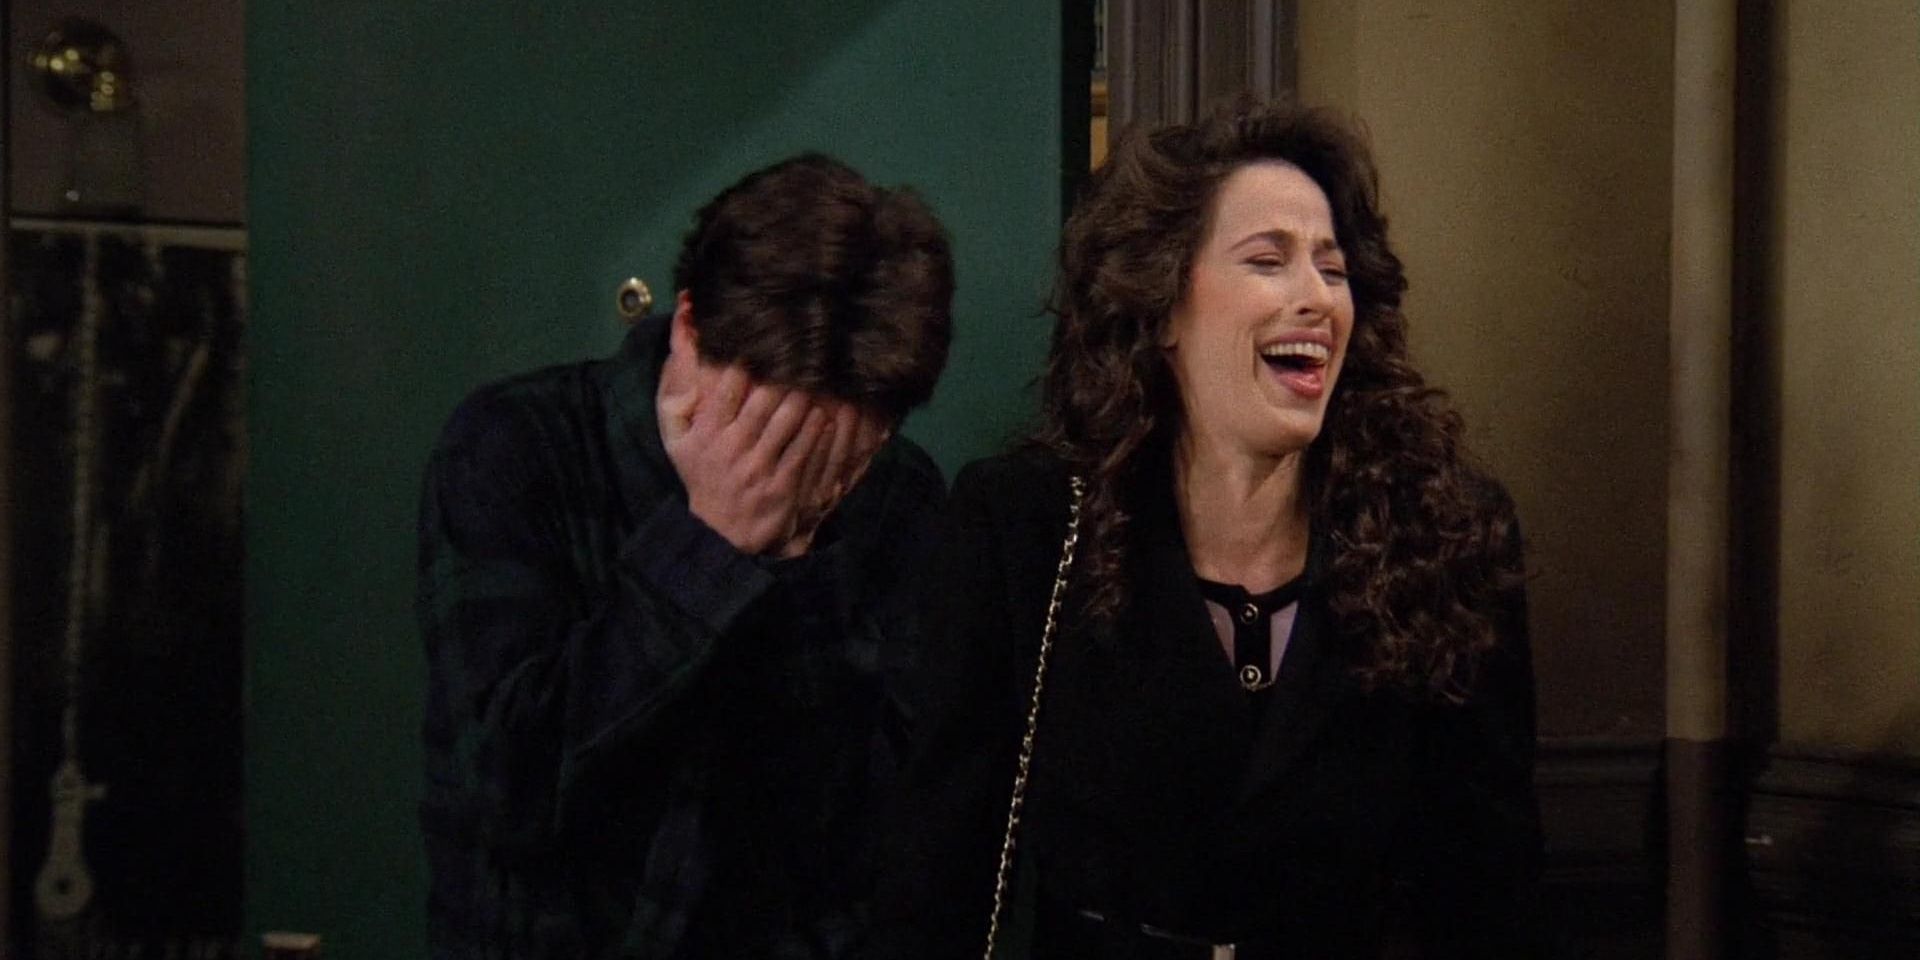 Chandler with his face in his hands while Janice laughs in Friends.